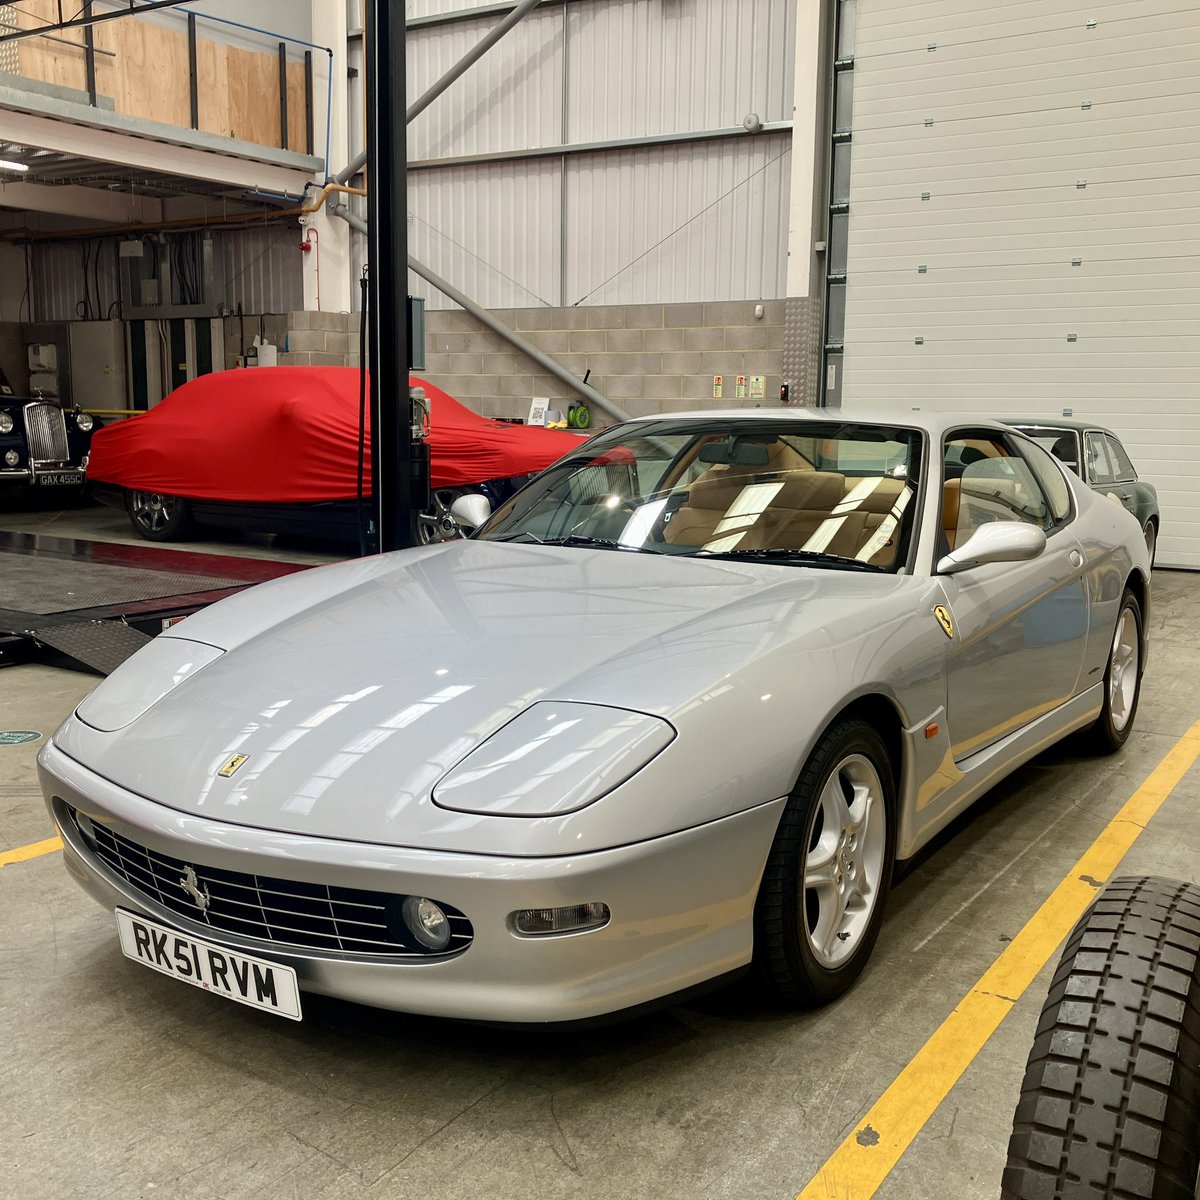 Ferrari 456M GT. Bought new by Eric Clapton in 2002 from Maranello Sales in Egham.

Argento Nurburgring paint and an open-gate manual gearbox. 🎸🤘🏻